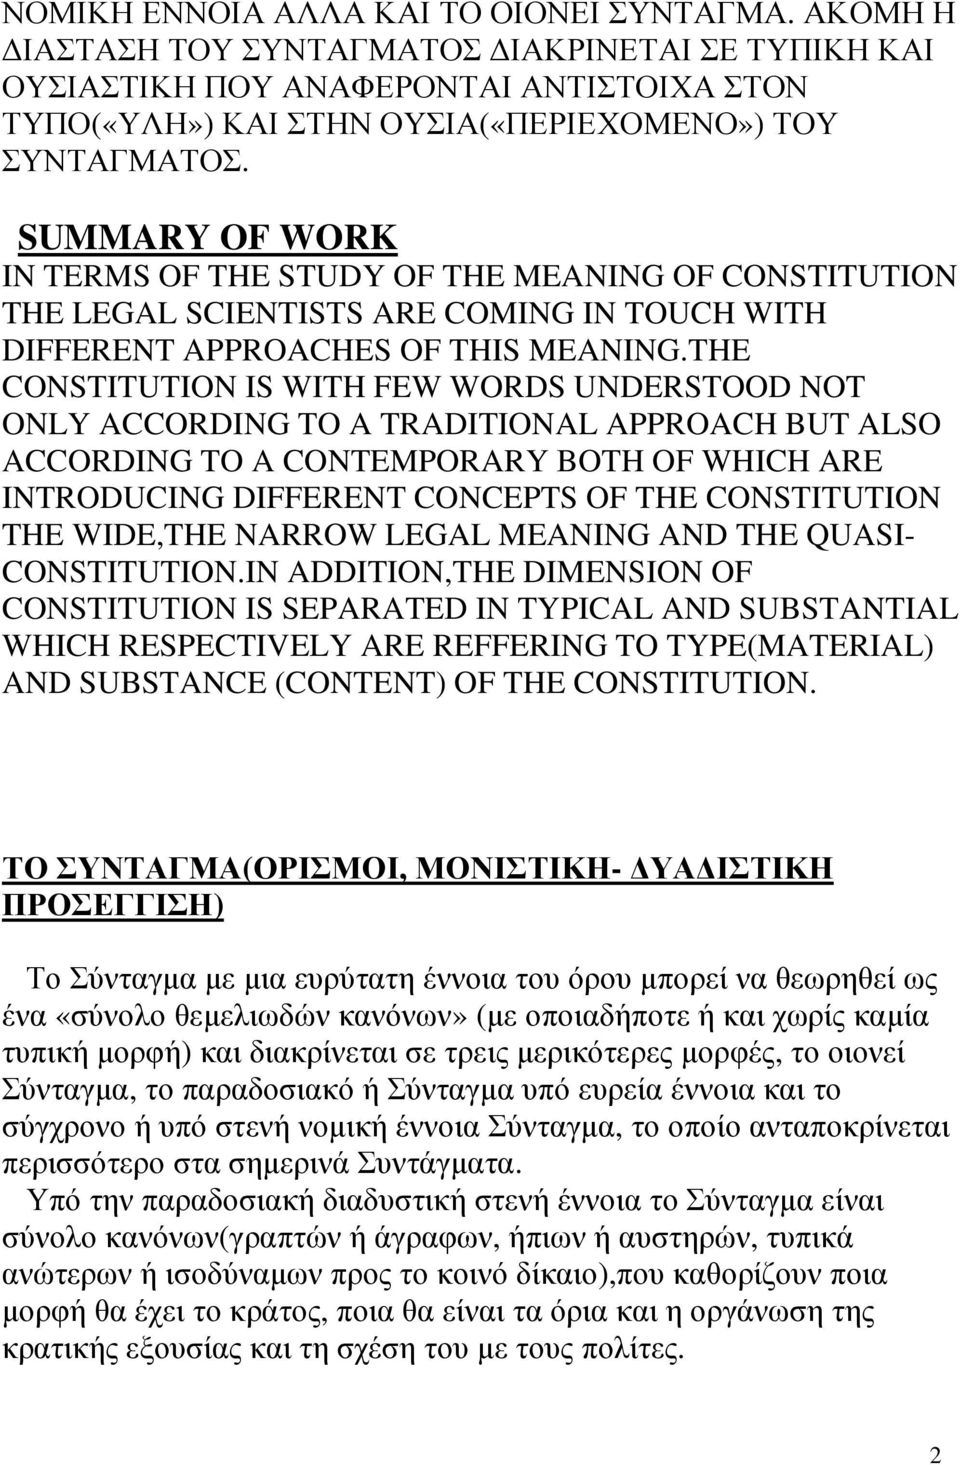 SUMMARY OF WORK IN TERMS OF THE STUDY OF THE MEANING OF CONSTITUTION THE LEGAL SCIENTISTS ARE COMING IN TOUCH WITH DIFFERENT APPROACHES OF THIS MEANING.